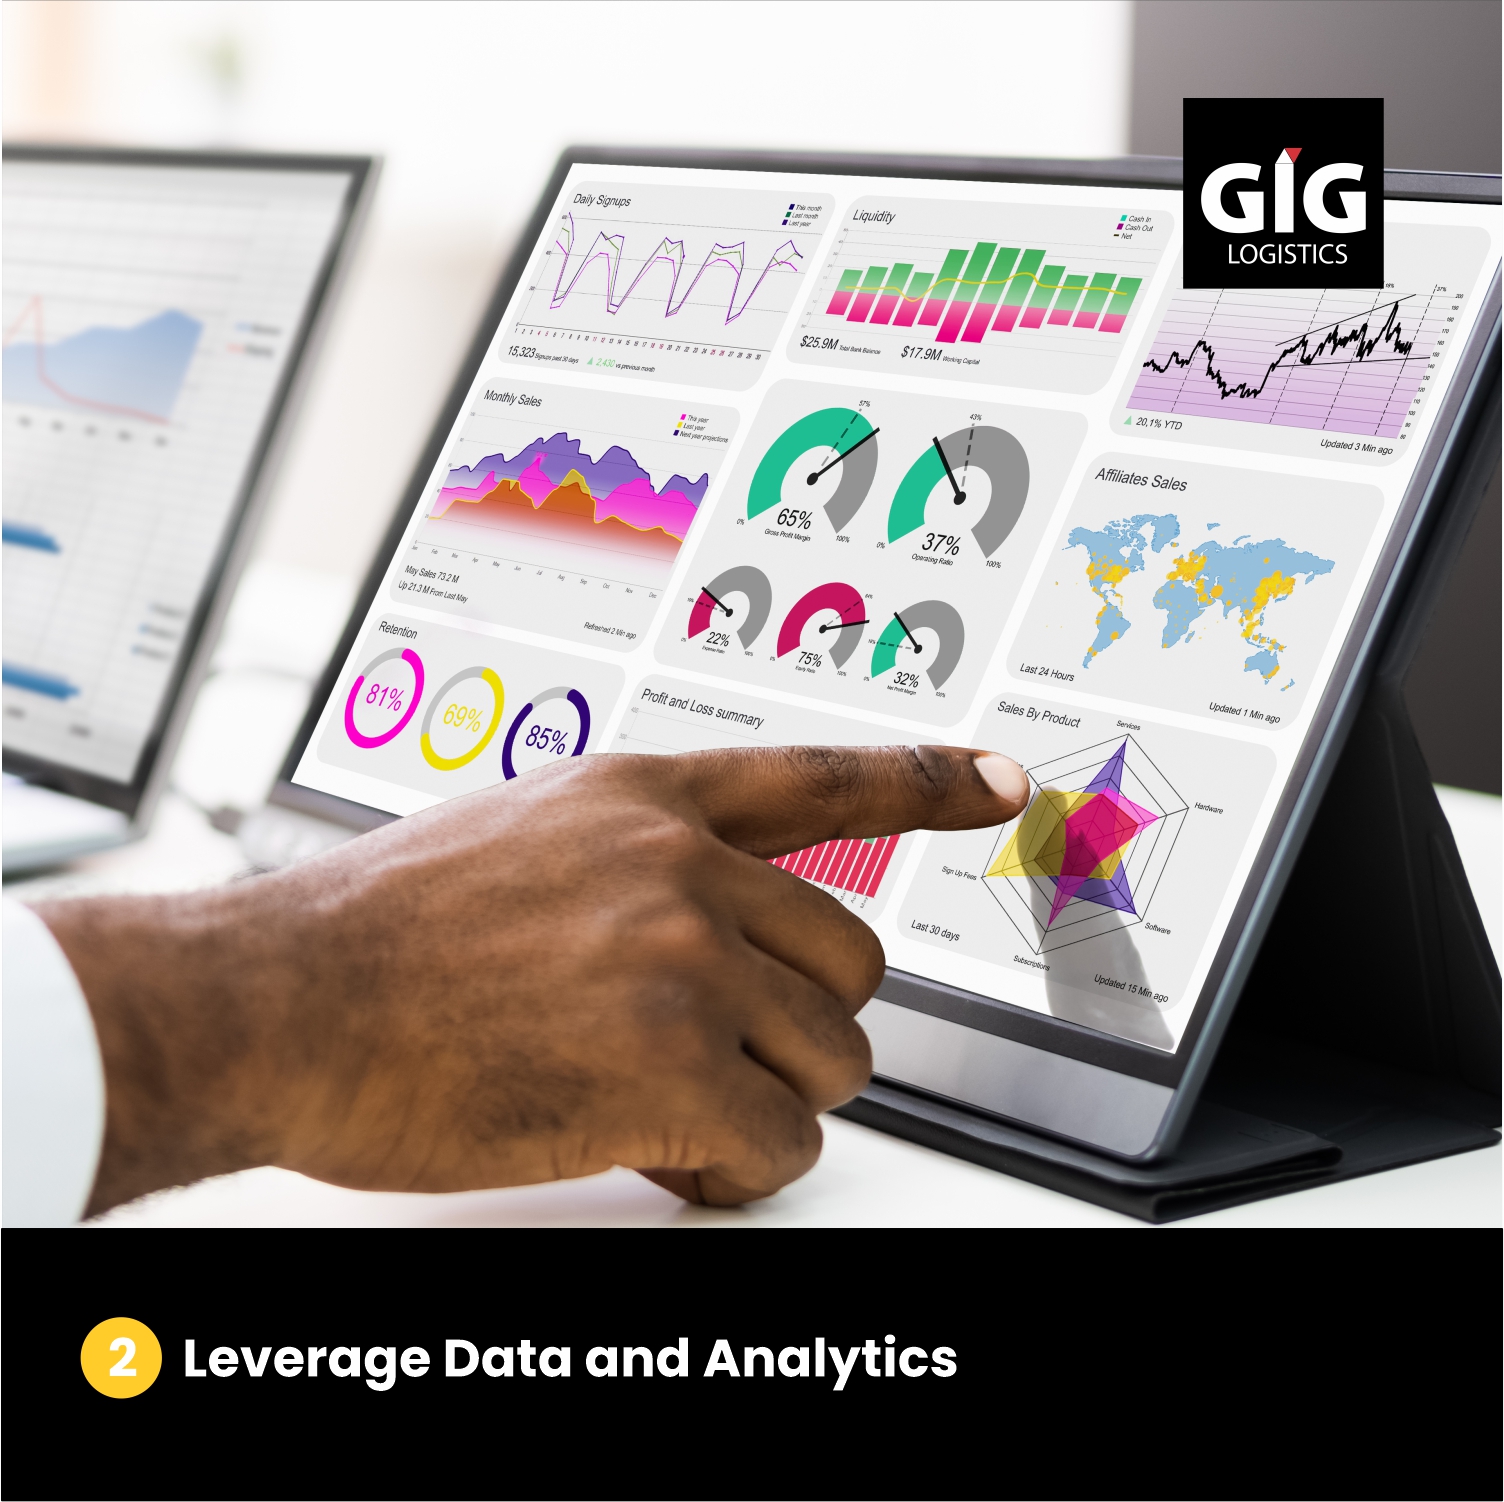   Leverage data and analytics for e-commerce operations